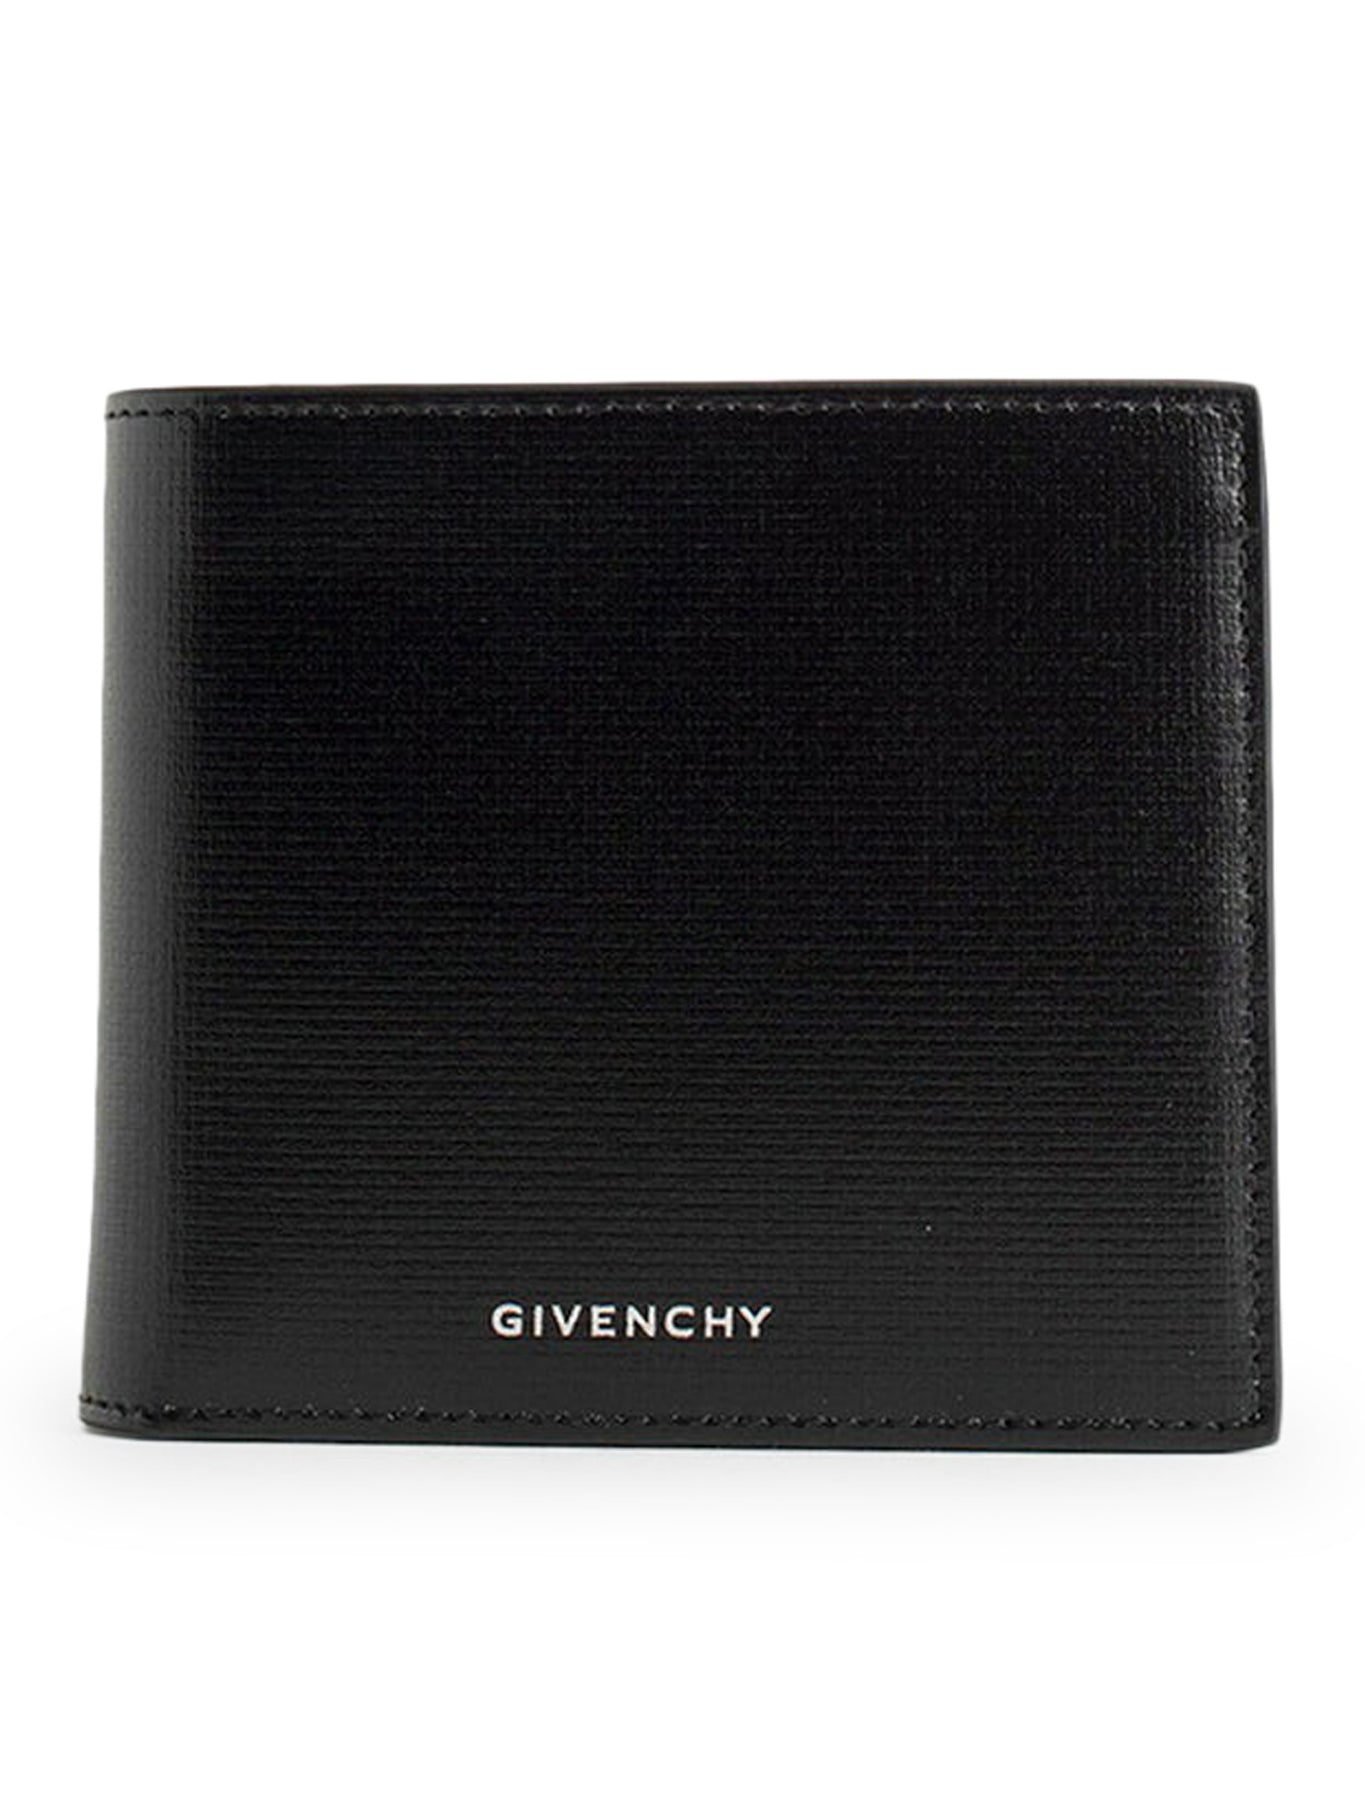 GIVENCHY wallet in 4G Classic leather